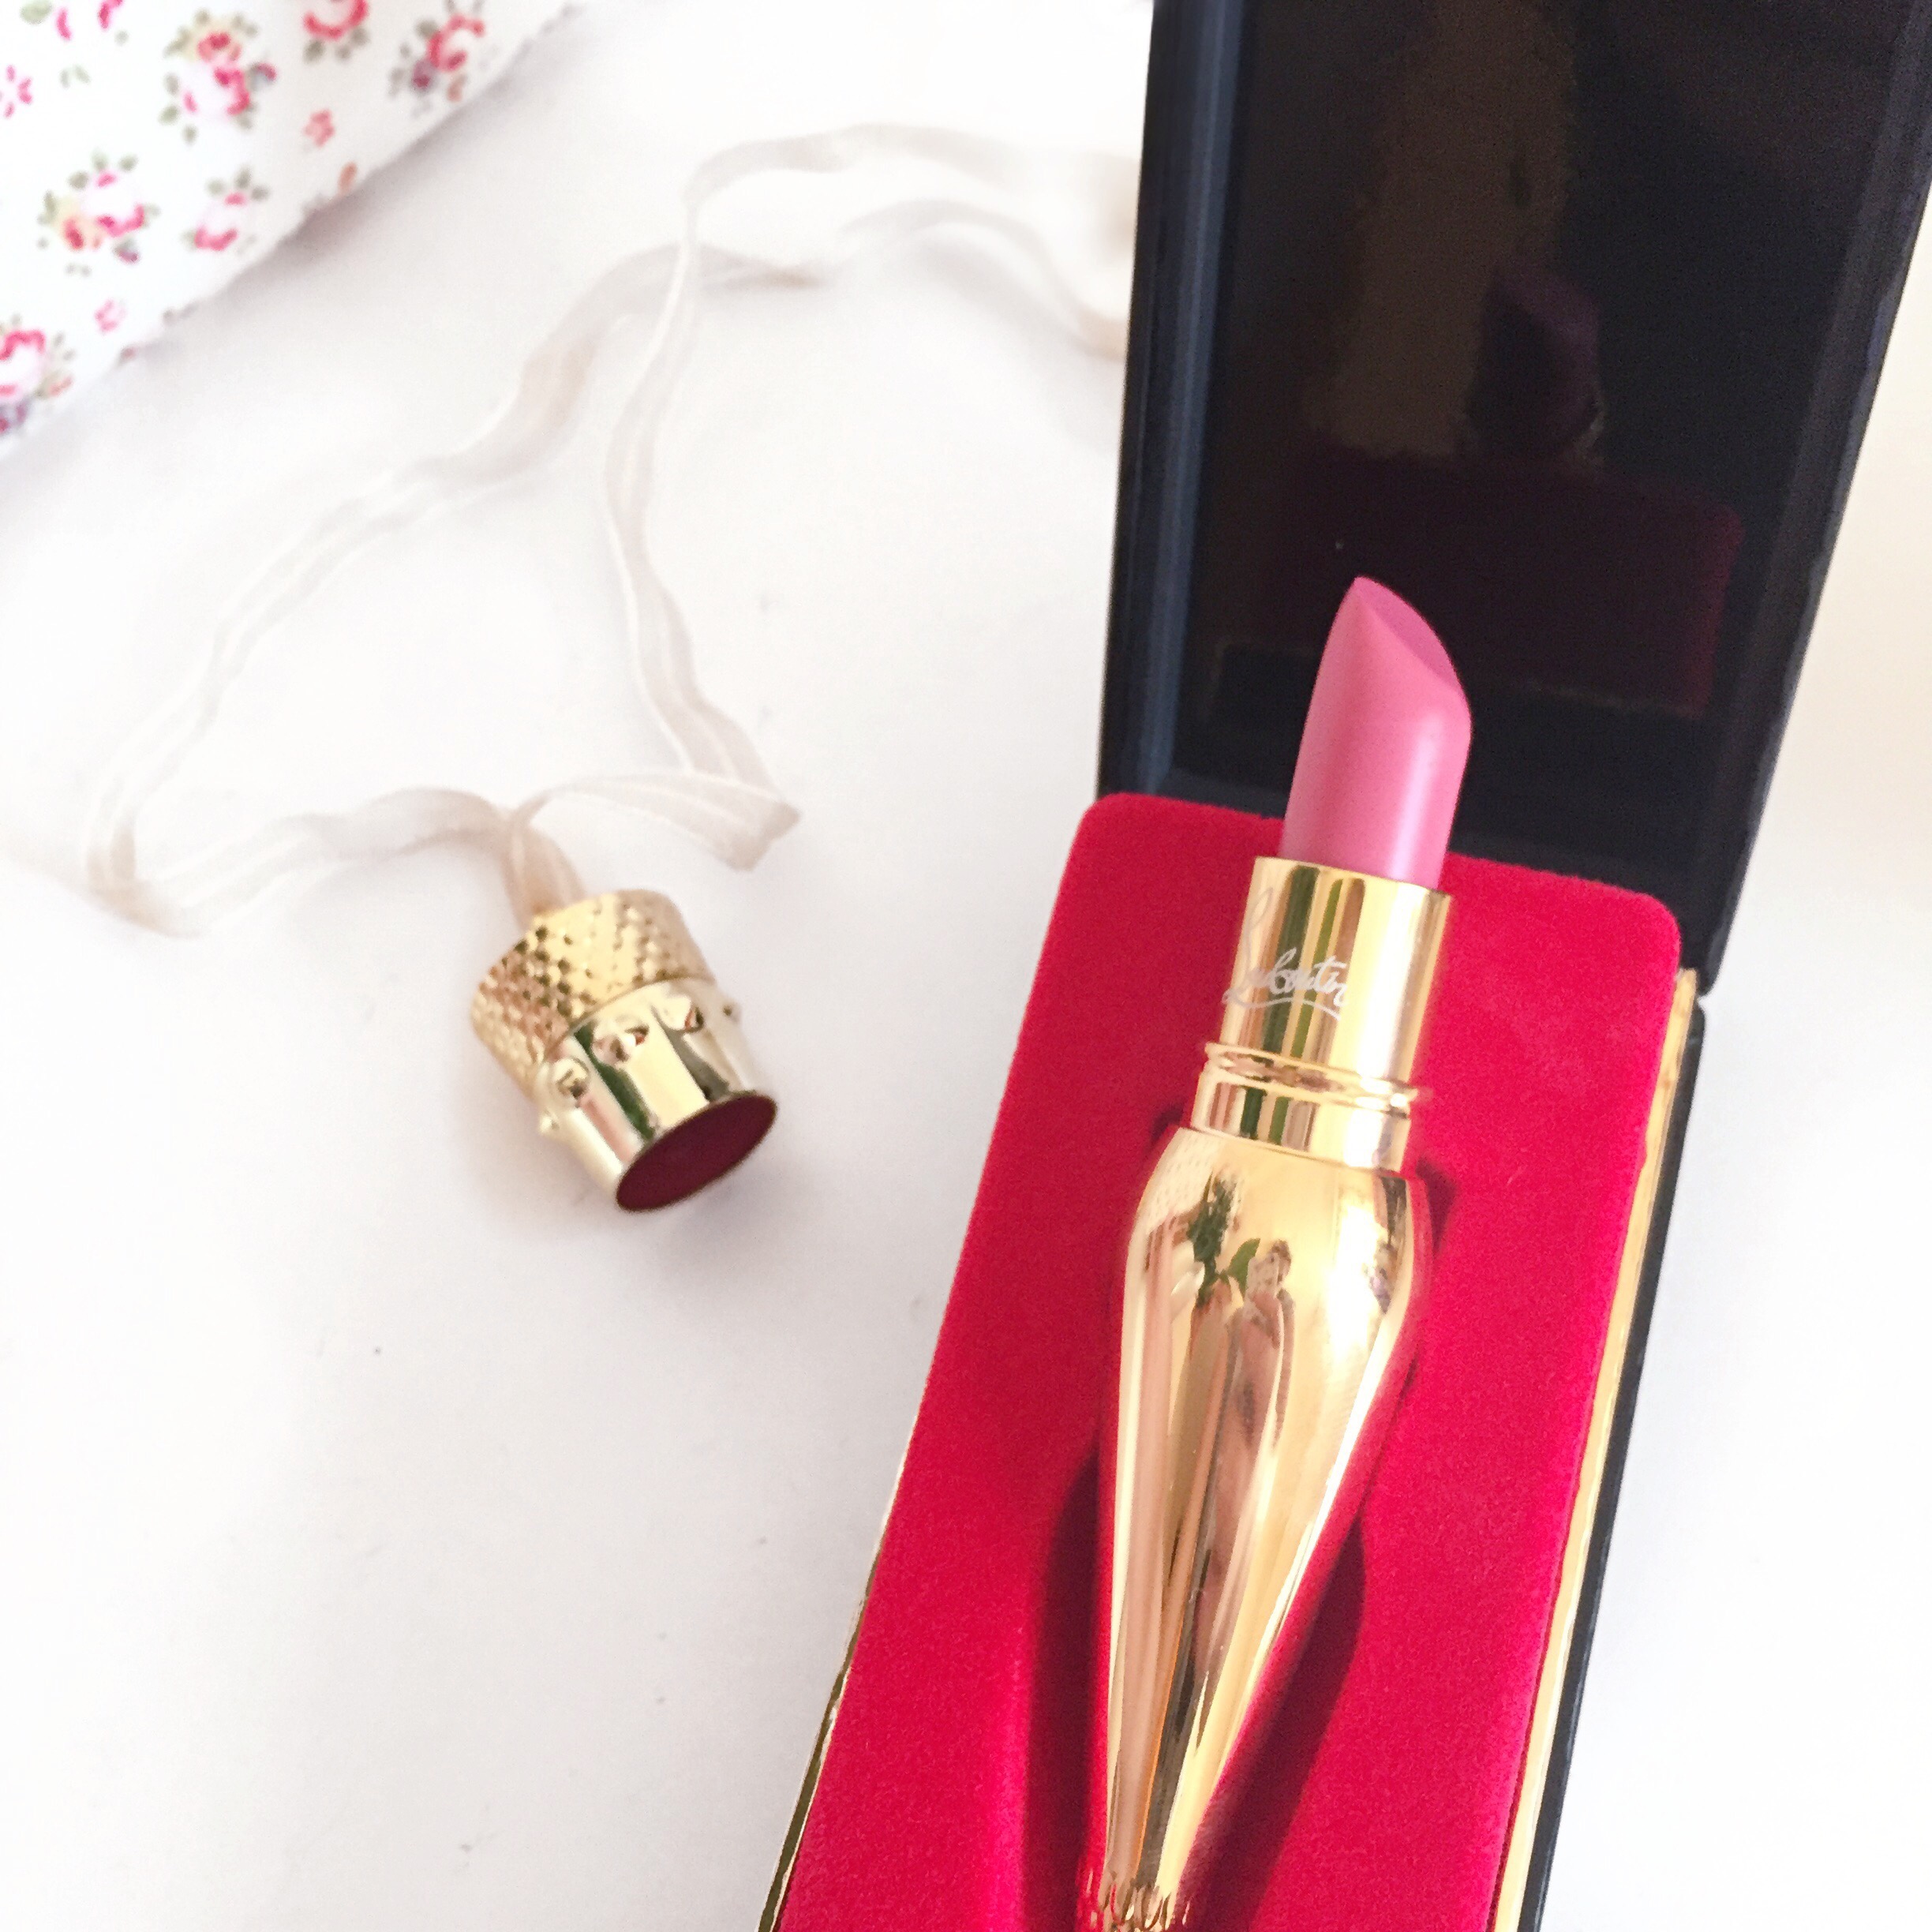 Christian Louboutin Lipstick Lip Swatches & Review 